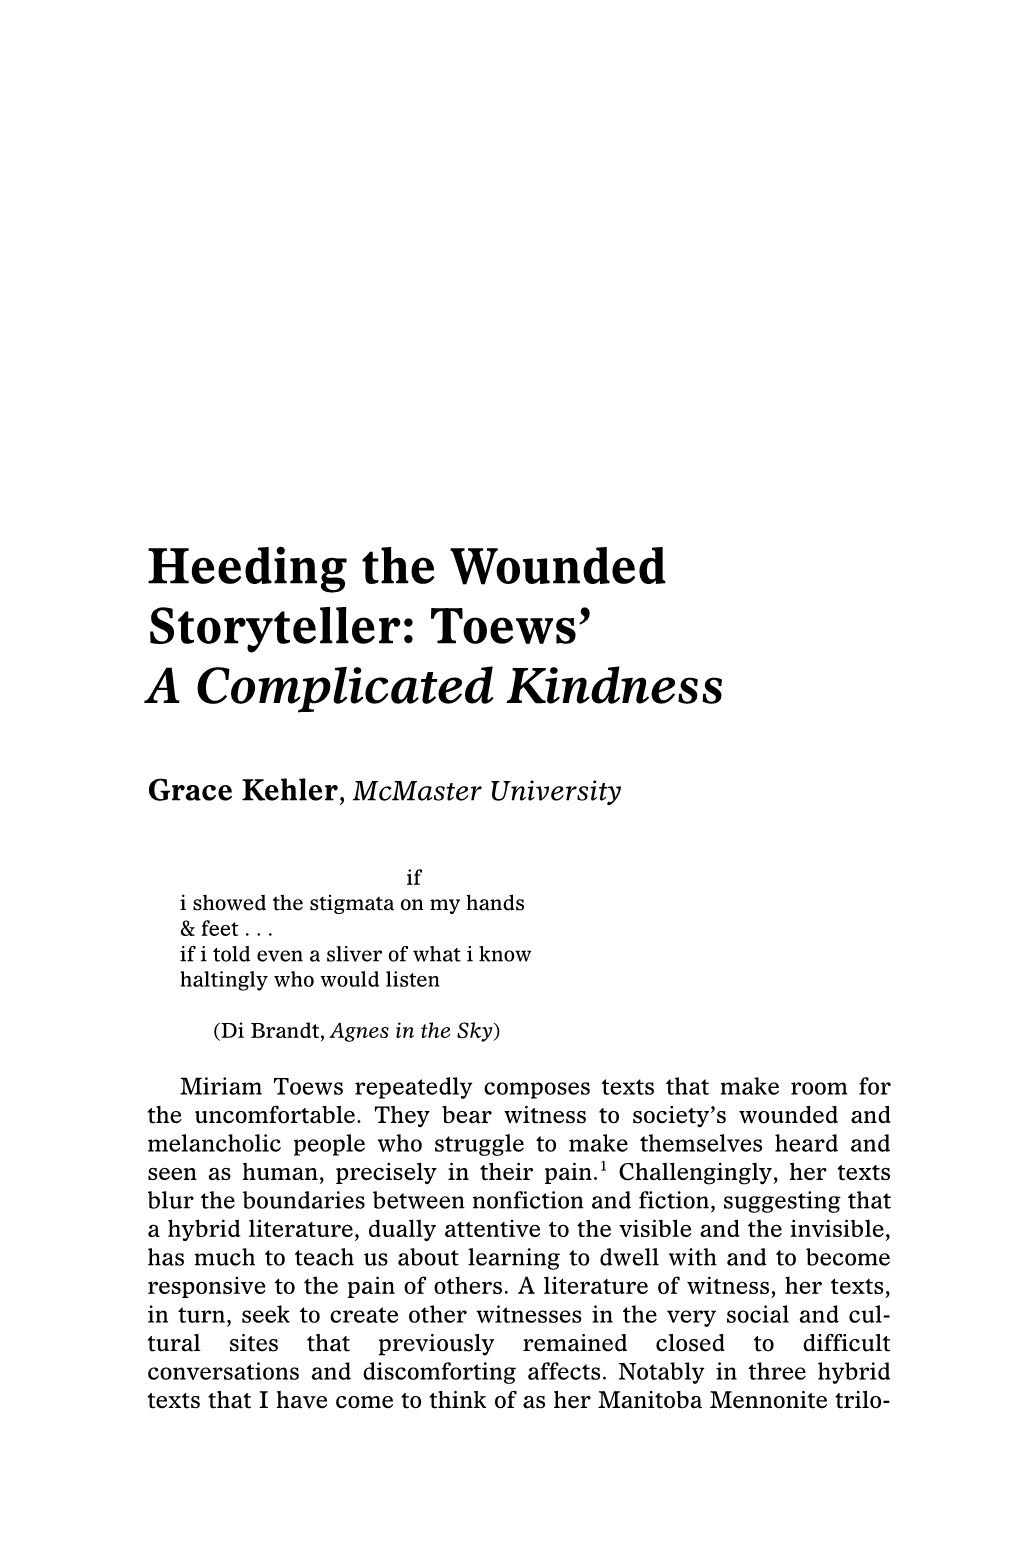 Heeding the Wounded Storyteller: Toews' a Complicated Kindness